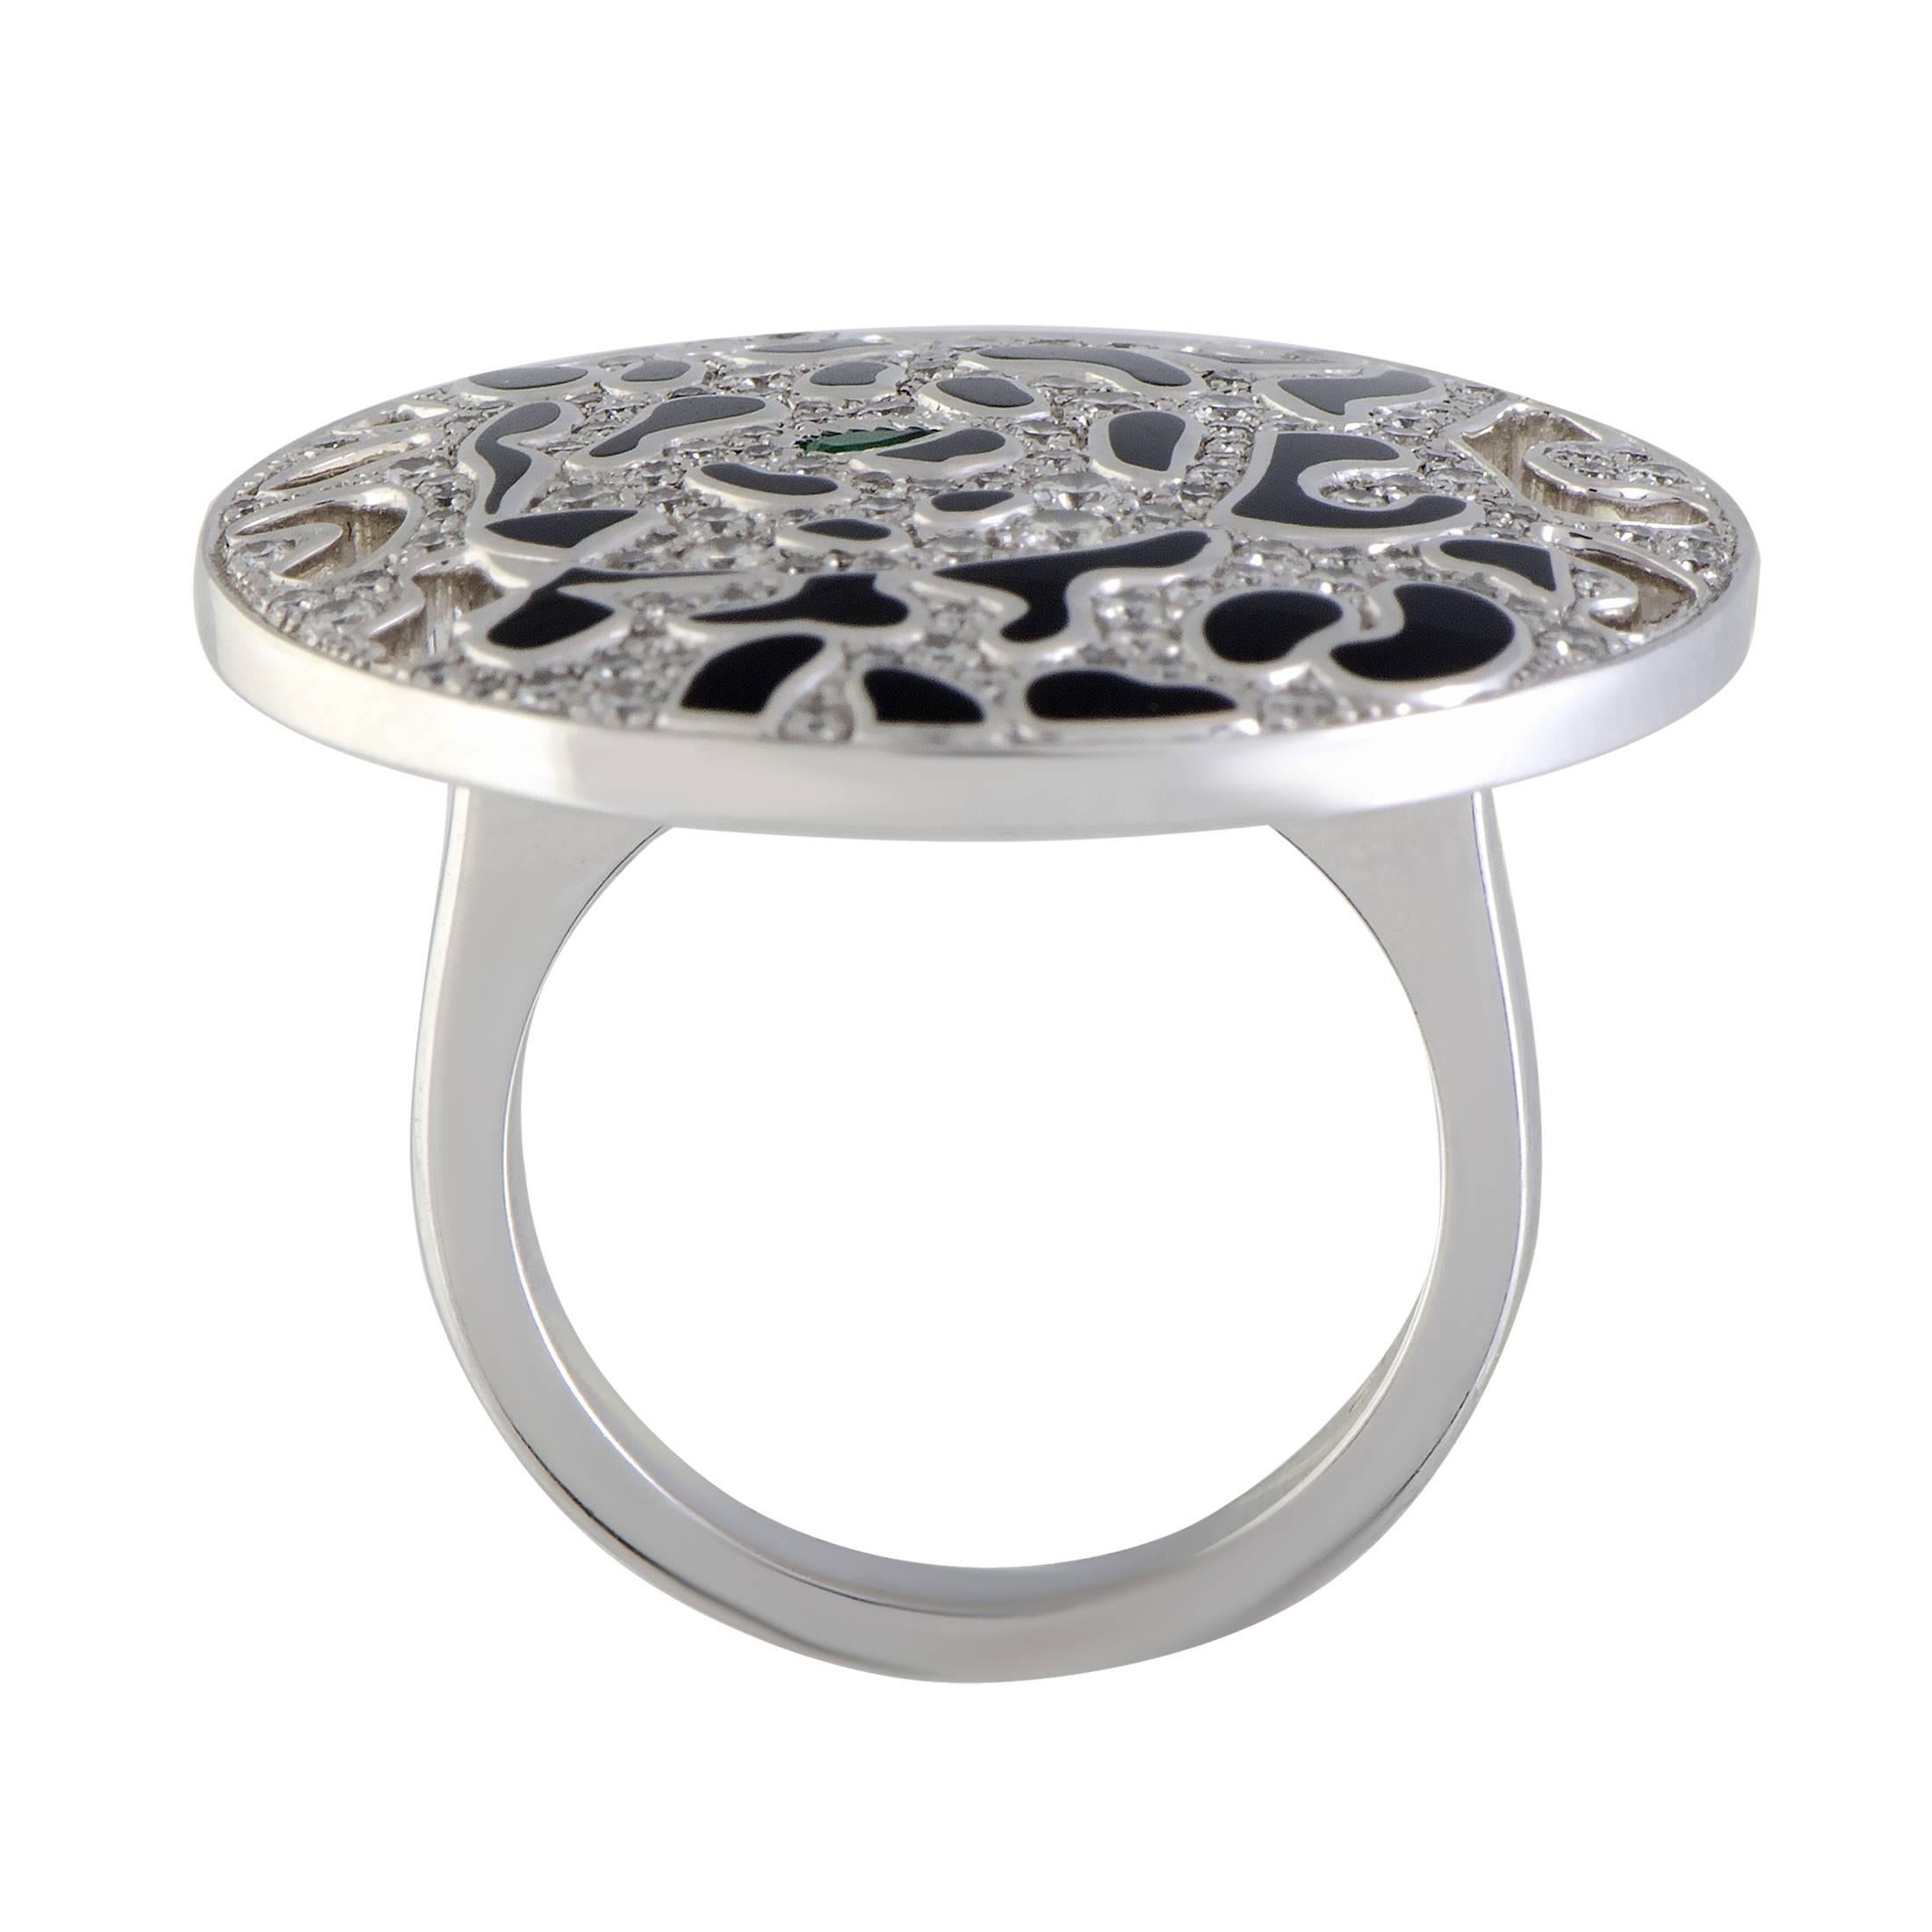 Created for the renowned “Panthère” collection, this attractive Cartier ring features an exceptionally bold, eye-catching design, offering a stunningly fashionable appearance. The ring is made of 18K white gold and lavishly set with scintillating